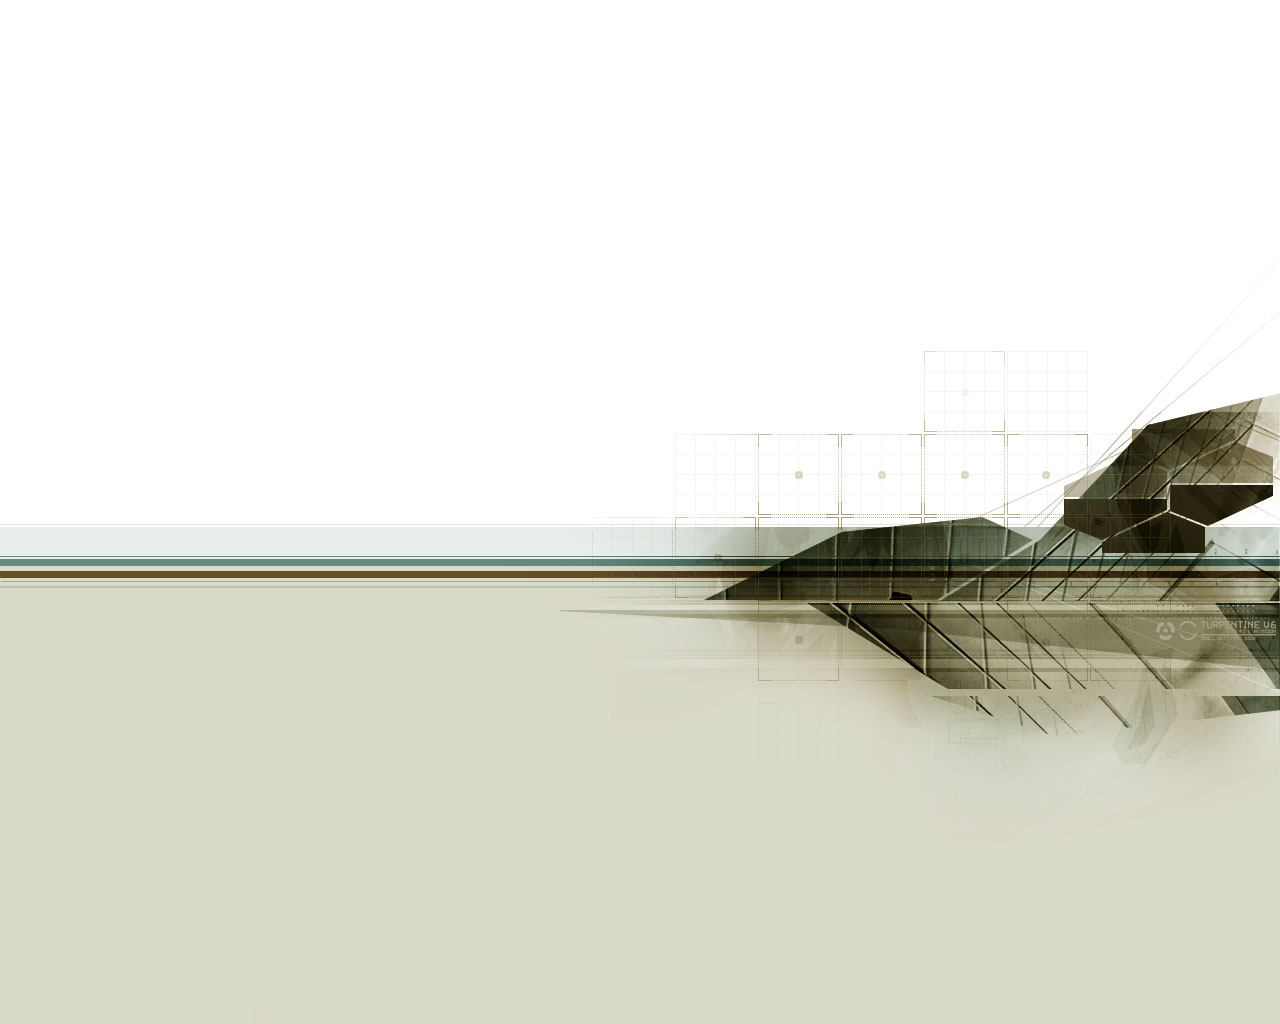 Digital artwork with an abstract composition of geometric shapes and manipulated photographs composed on the right side against a white and beige background.